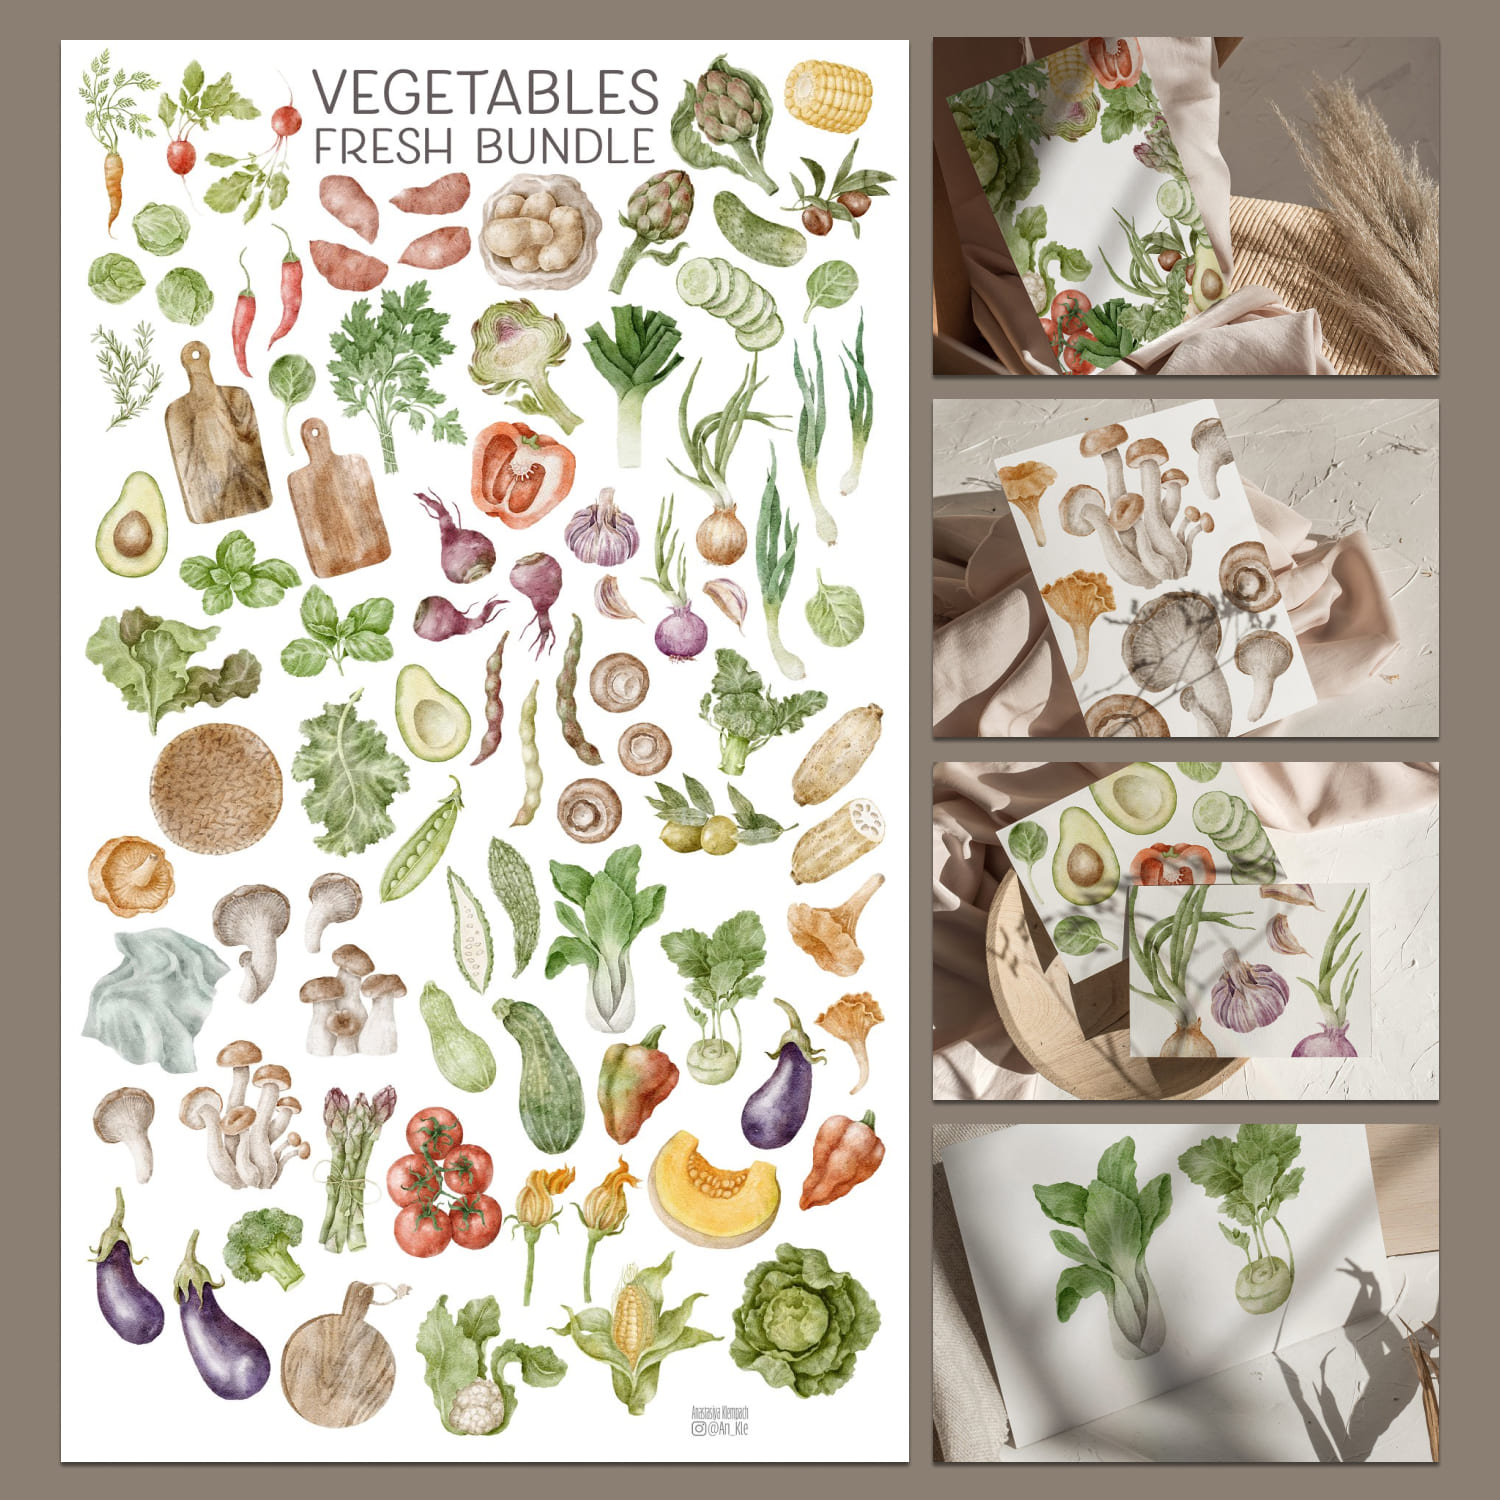 Vegetables bundle created by An_Kle 2.